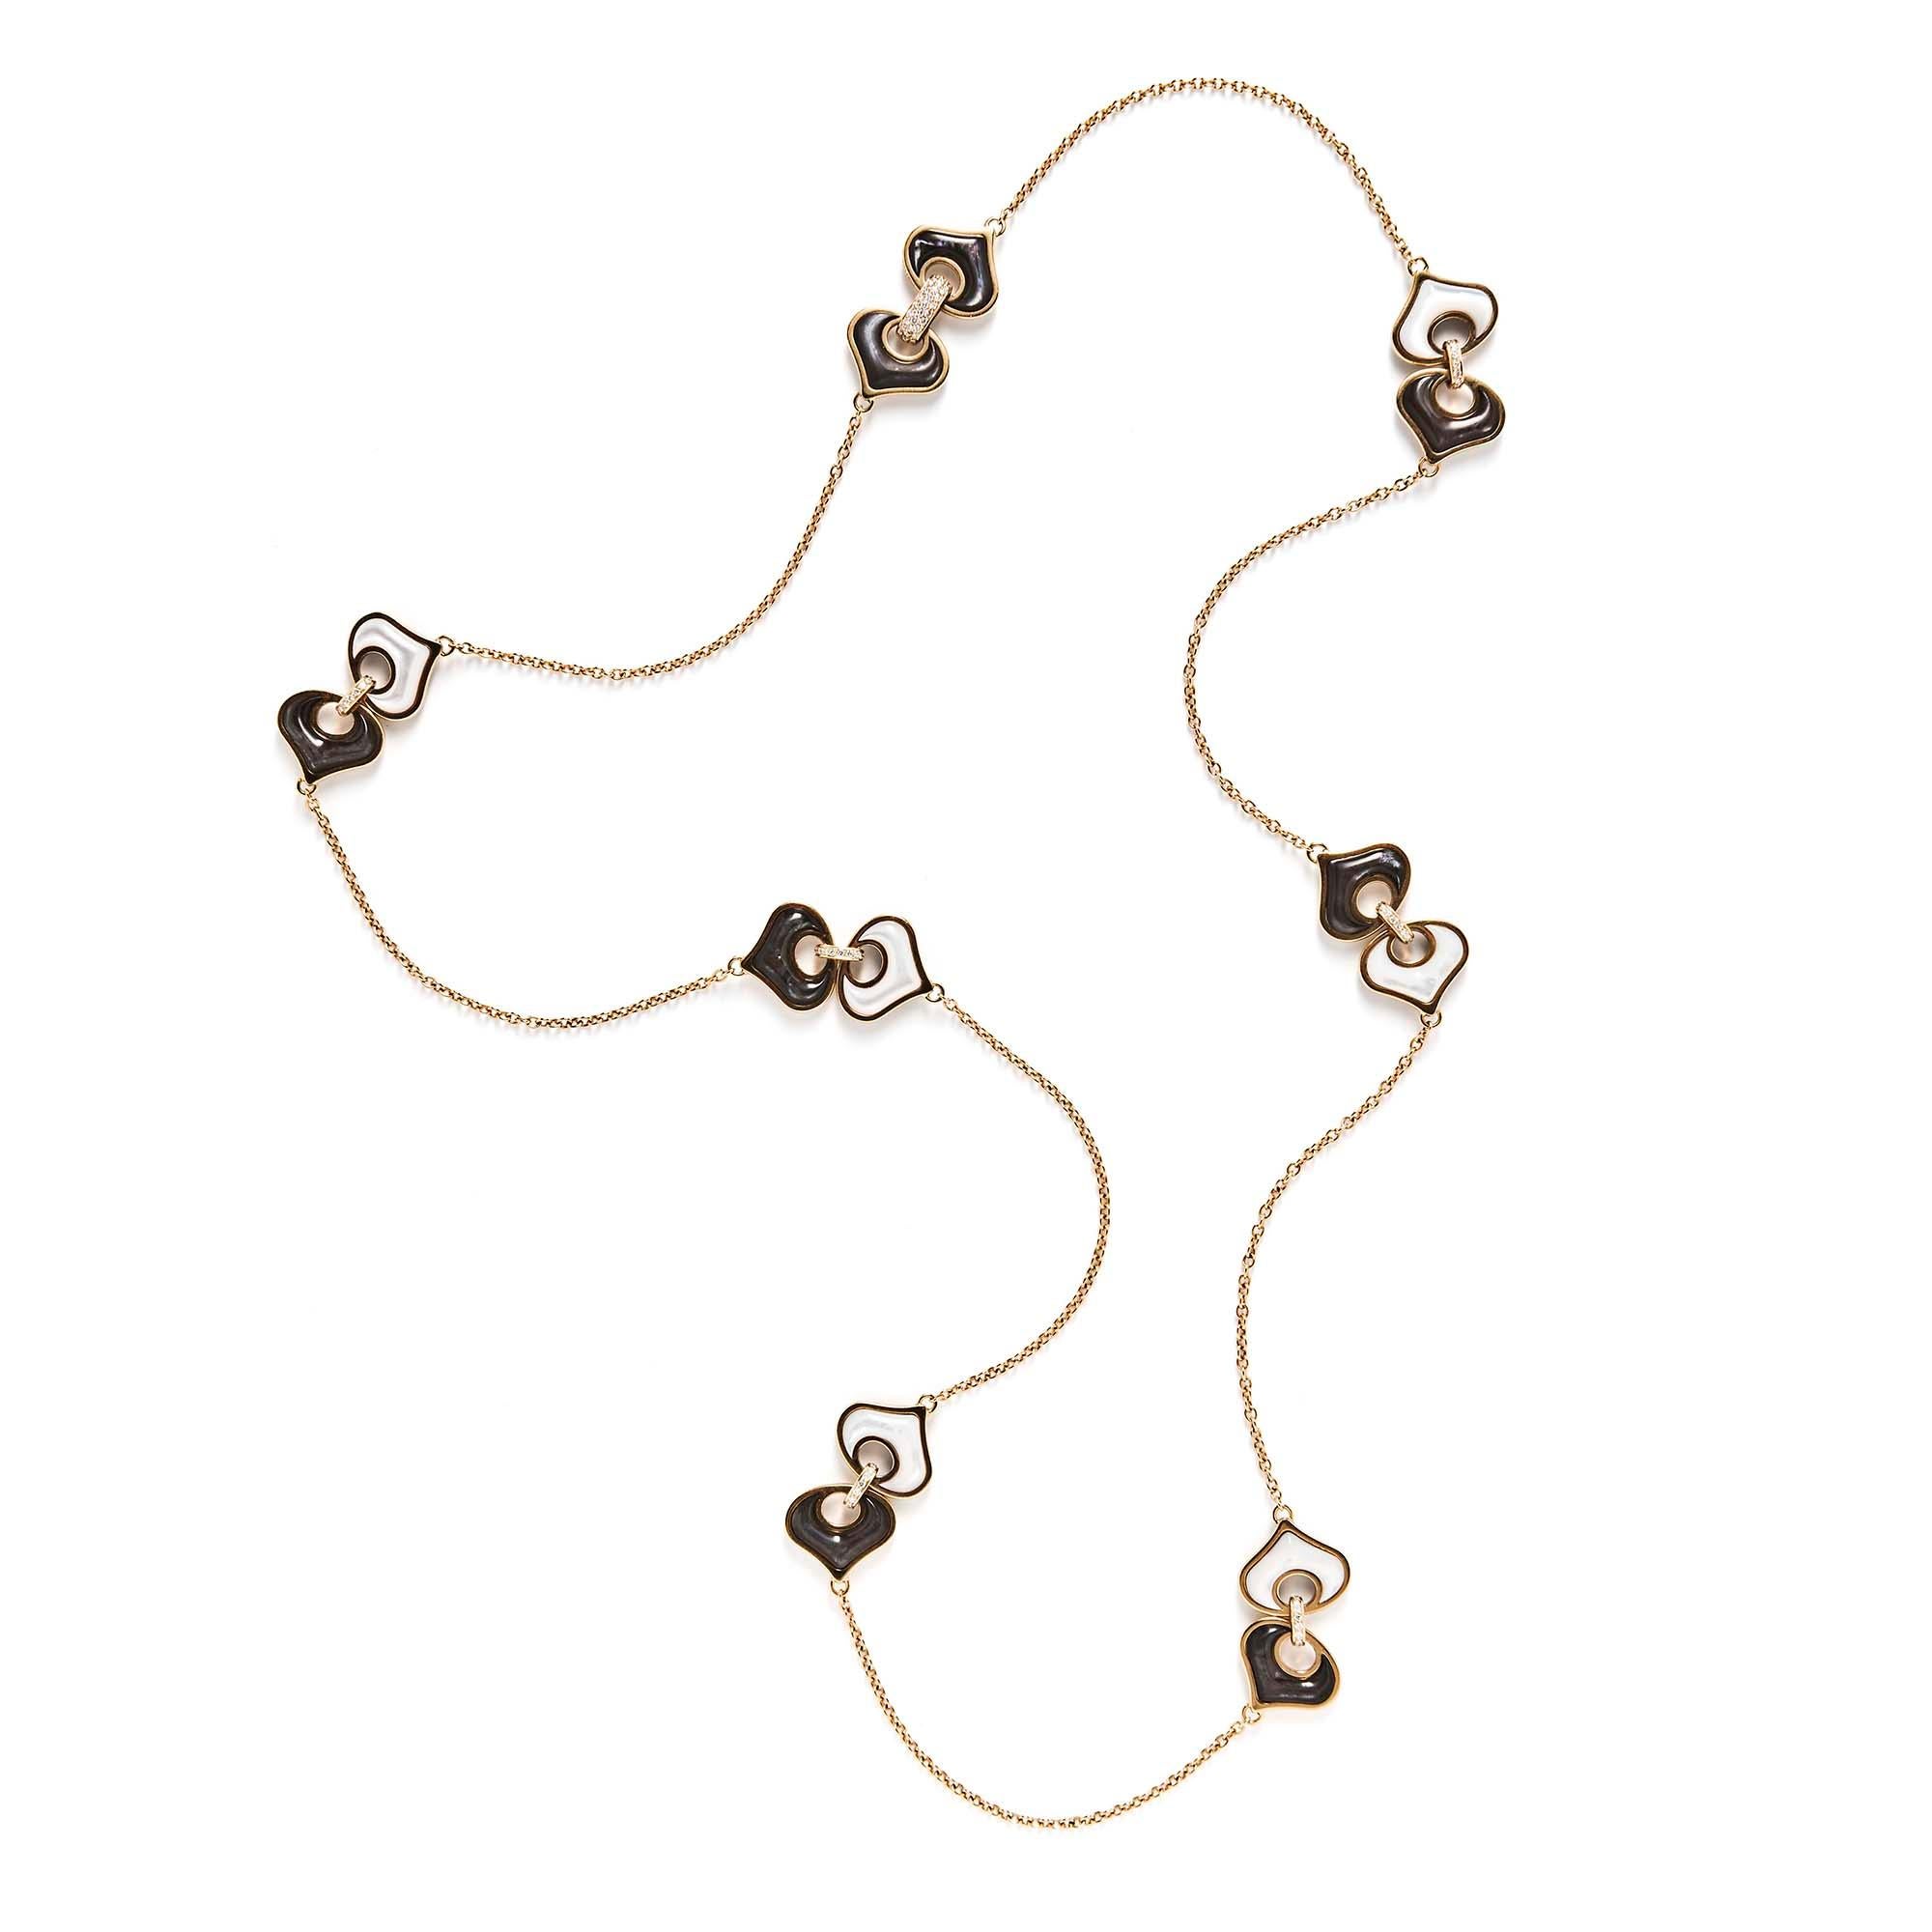 Marina B’s designs are characterized by a sense of refinement and ease. This classic oval link chain is spaced by seven pairs of fancy-shaped white and brown mother-of-pearl stations set within polished gold frames. They are joined by diamond-set